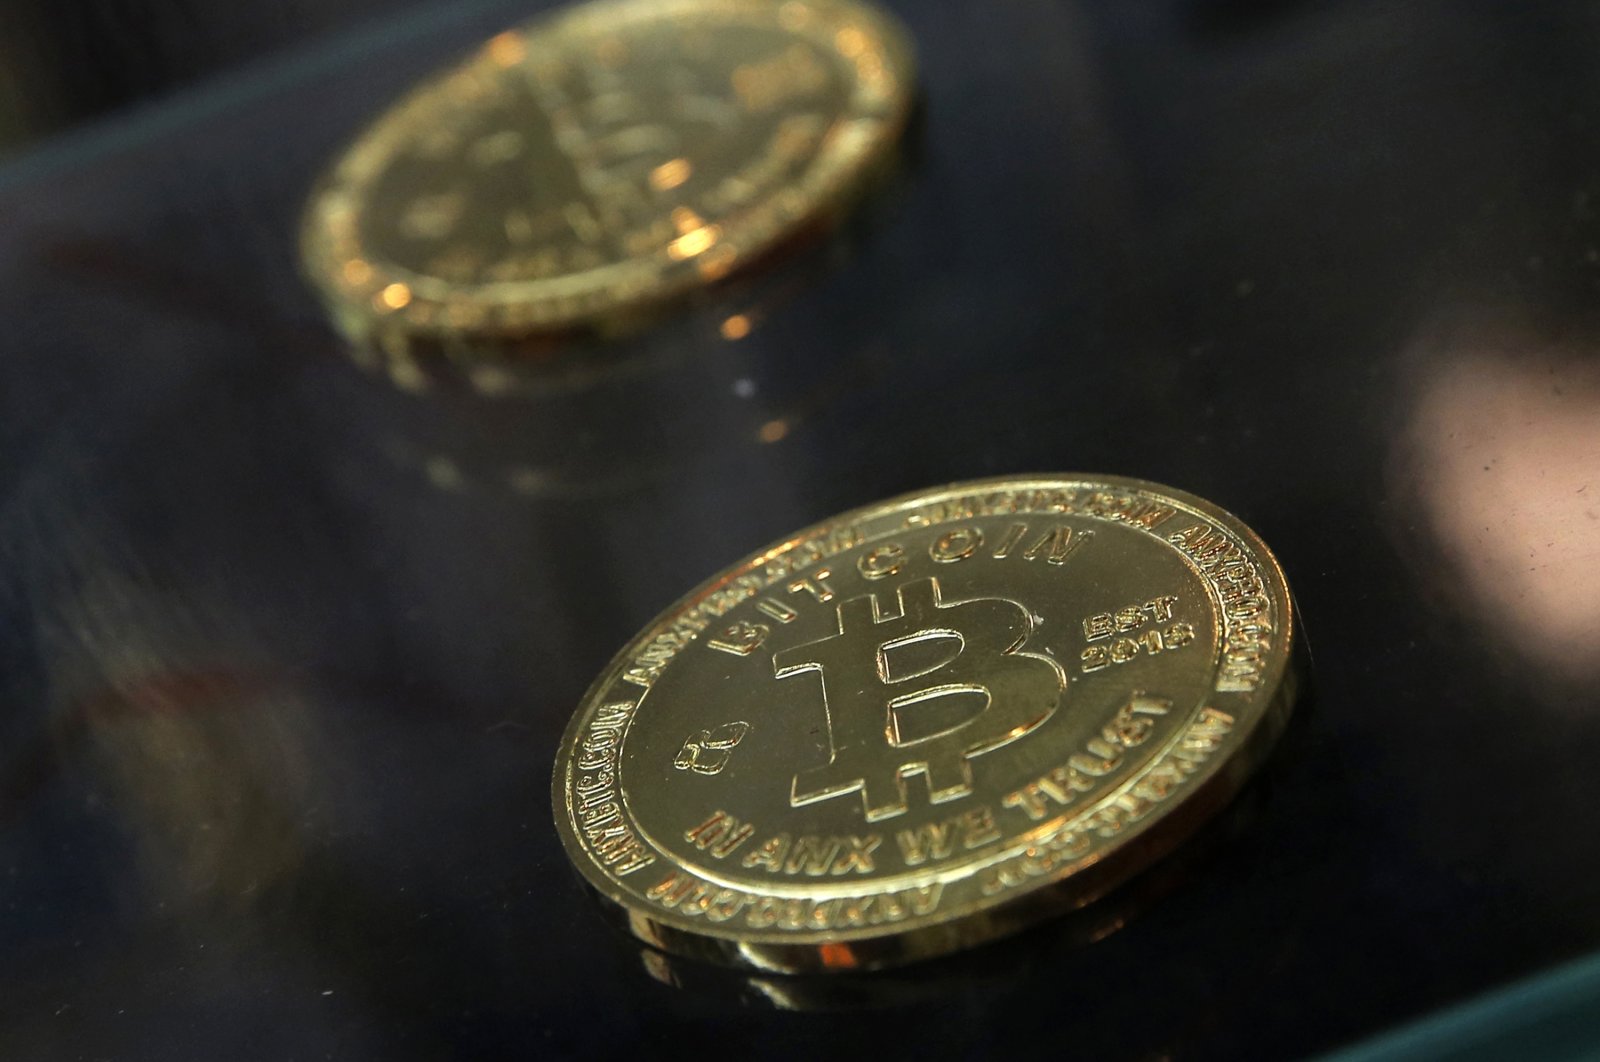 Bitcoin passes $30K mark for first time | Daily Sabah